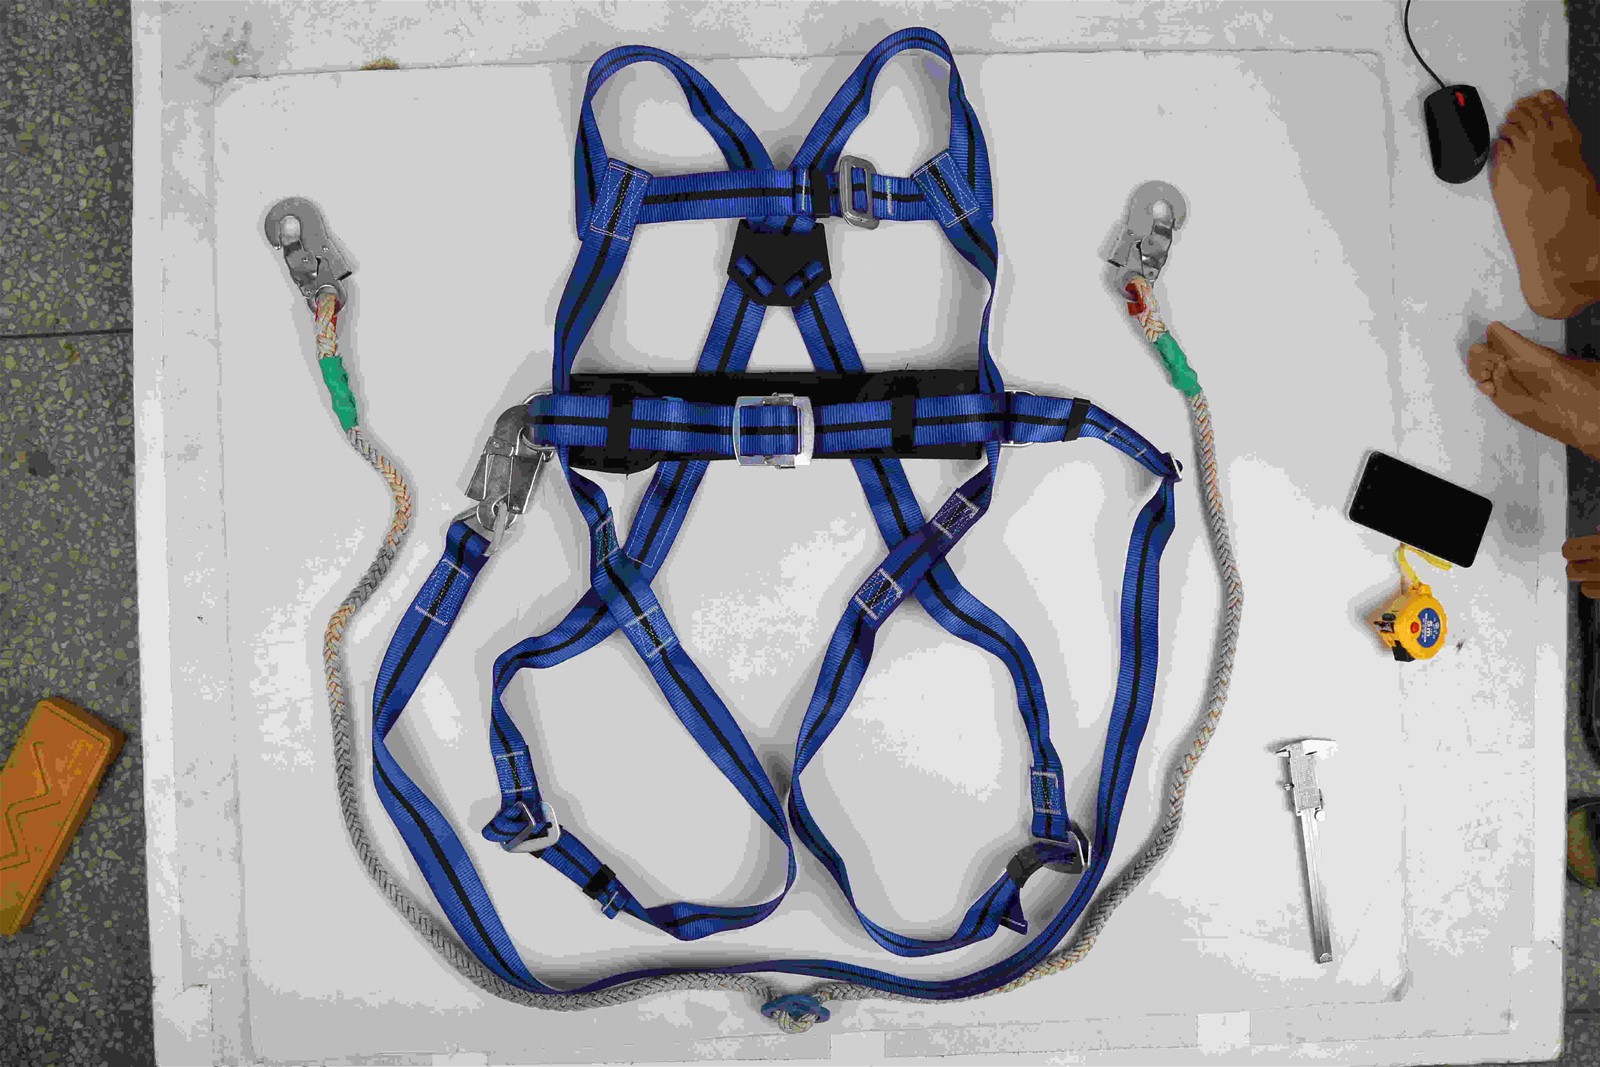 Safety Harness with Belt